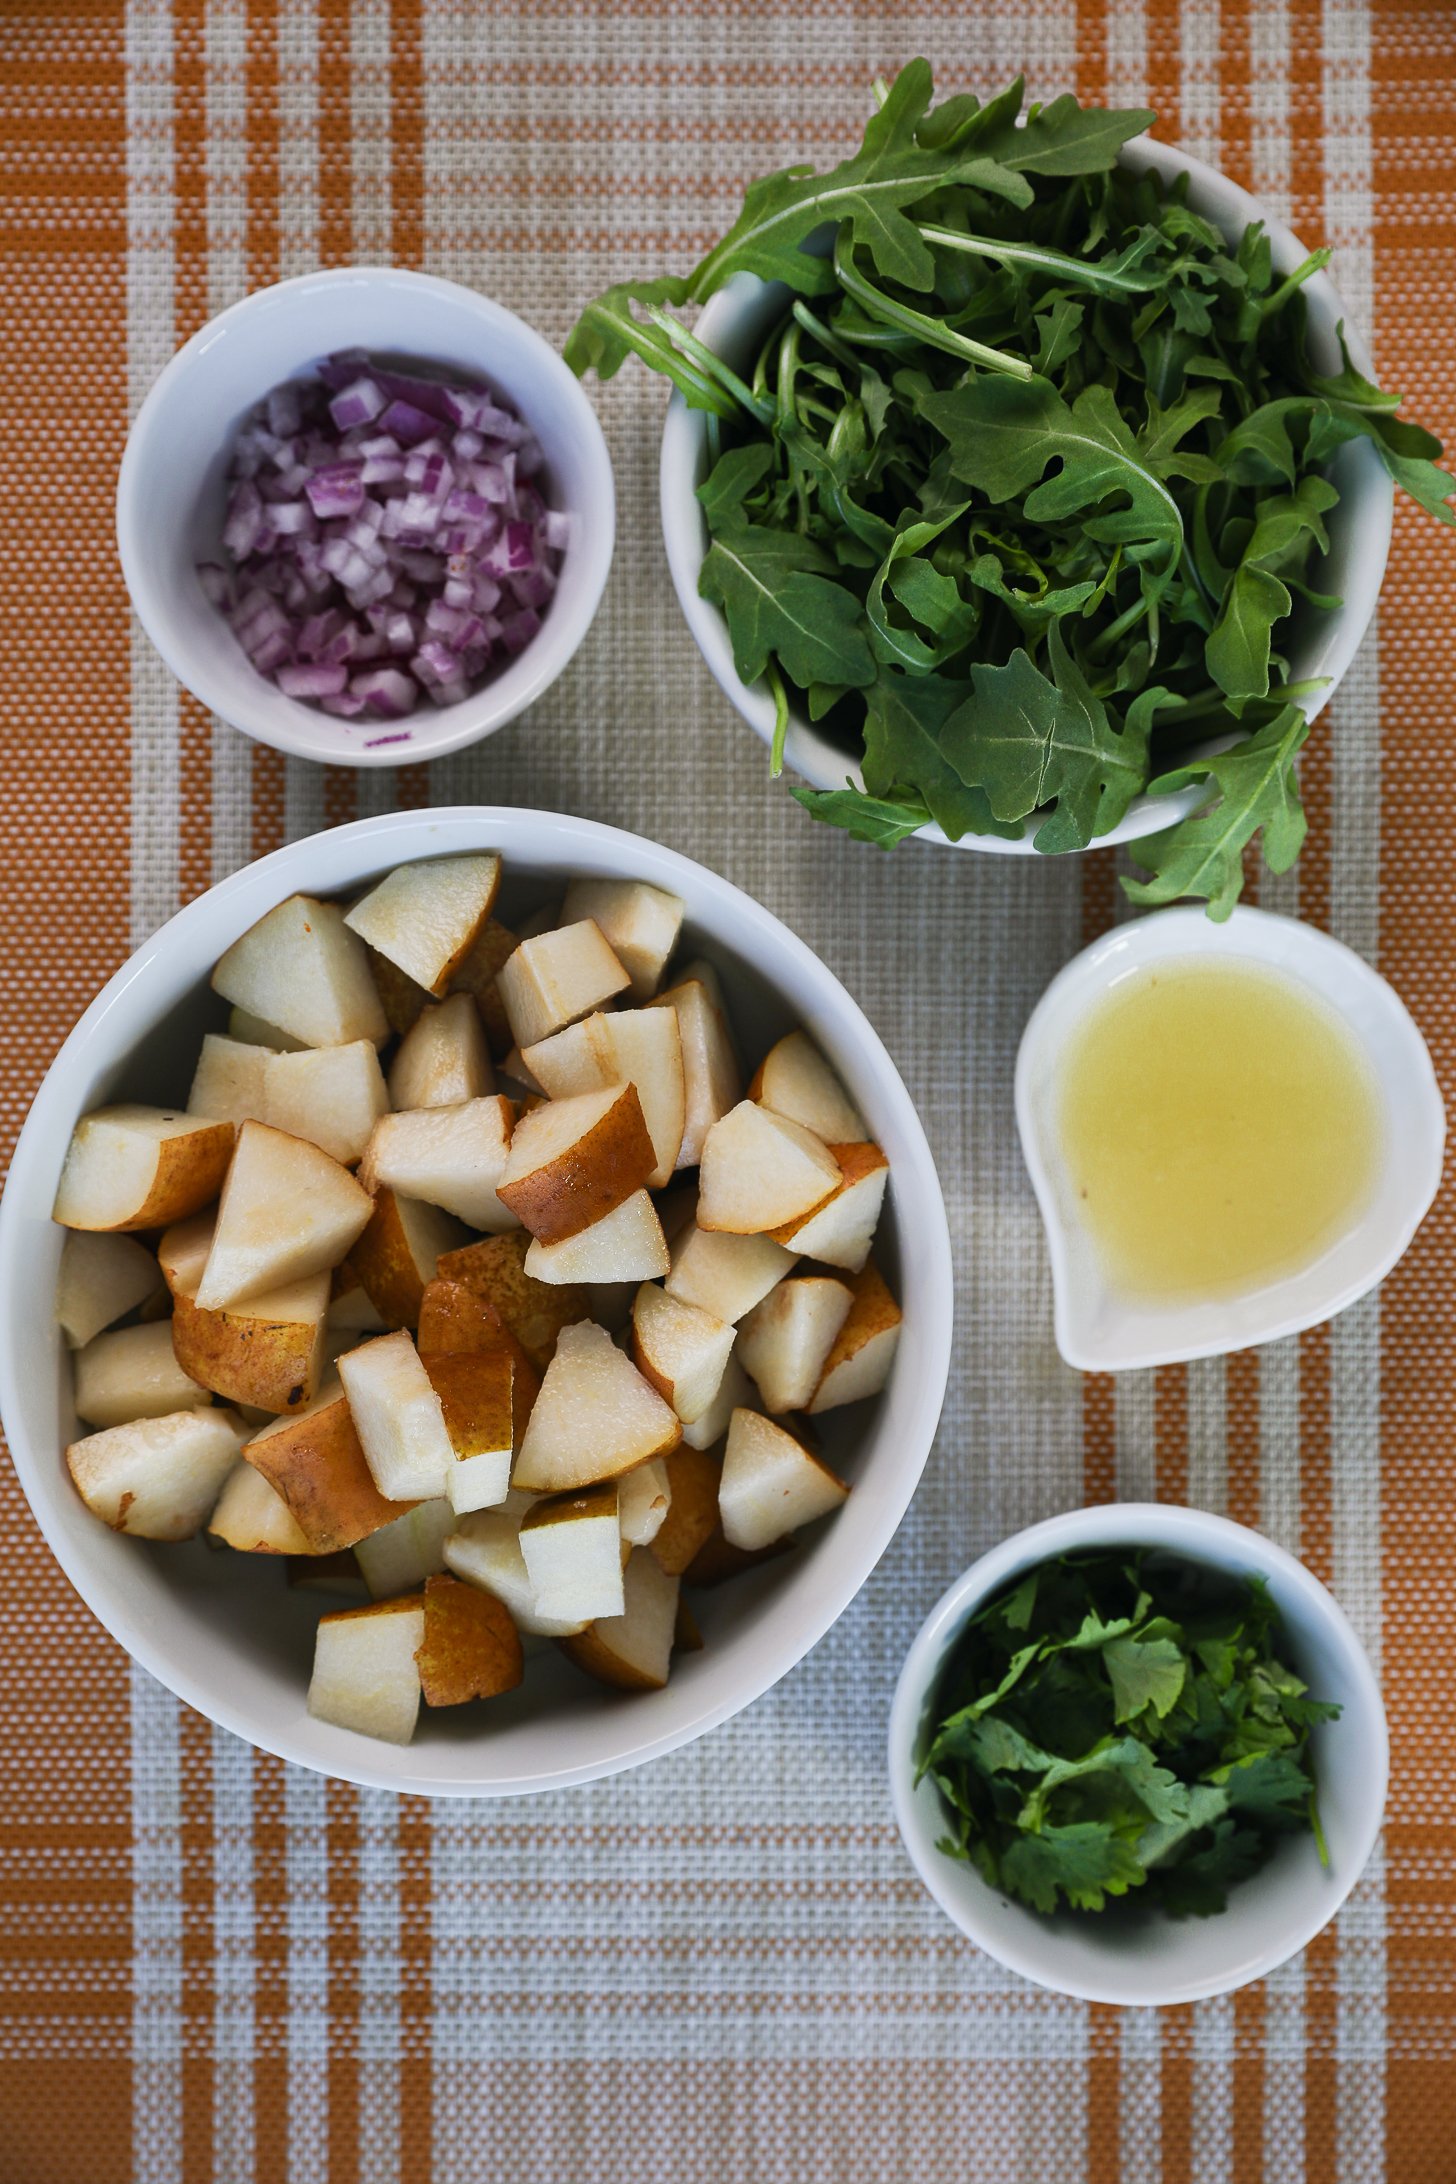 A display of food ingredients ready for salad prep. Ingredients include pear chunks, chopped red onion, rocket (arugula), lemon juice and cilantro leaves.